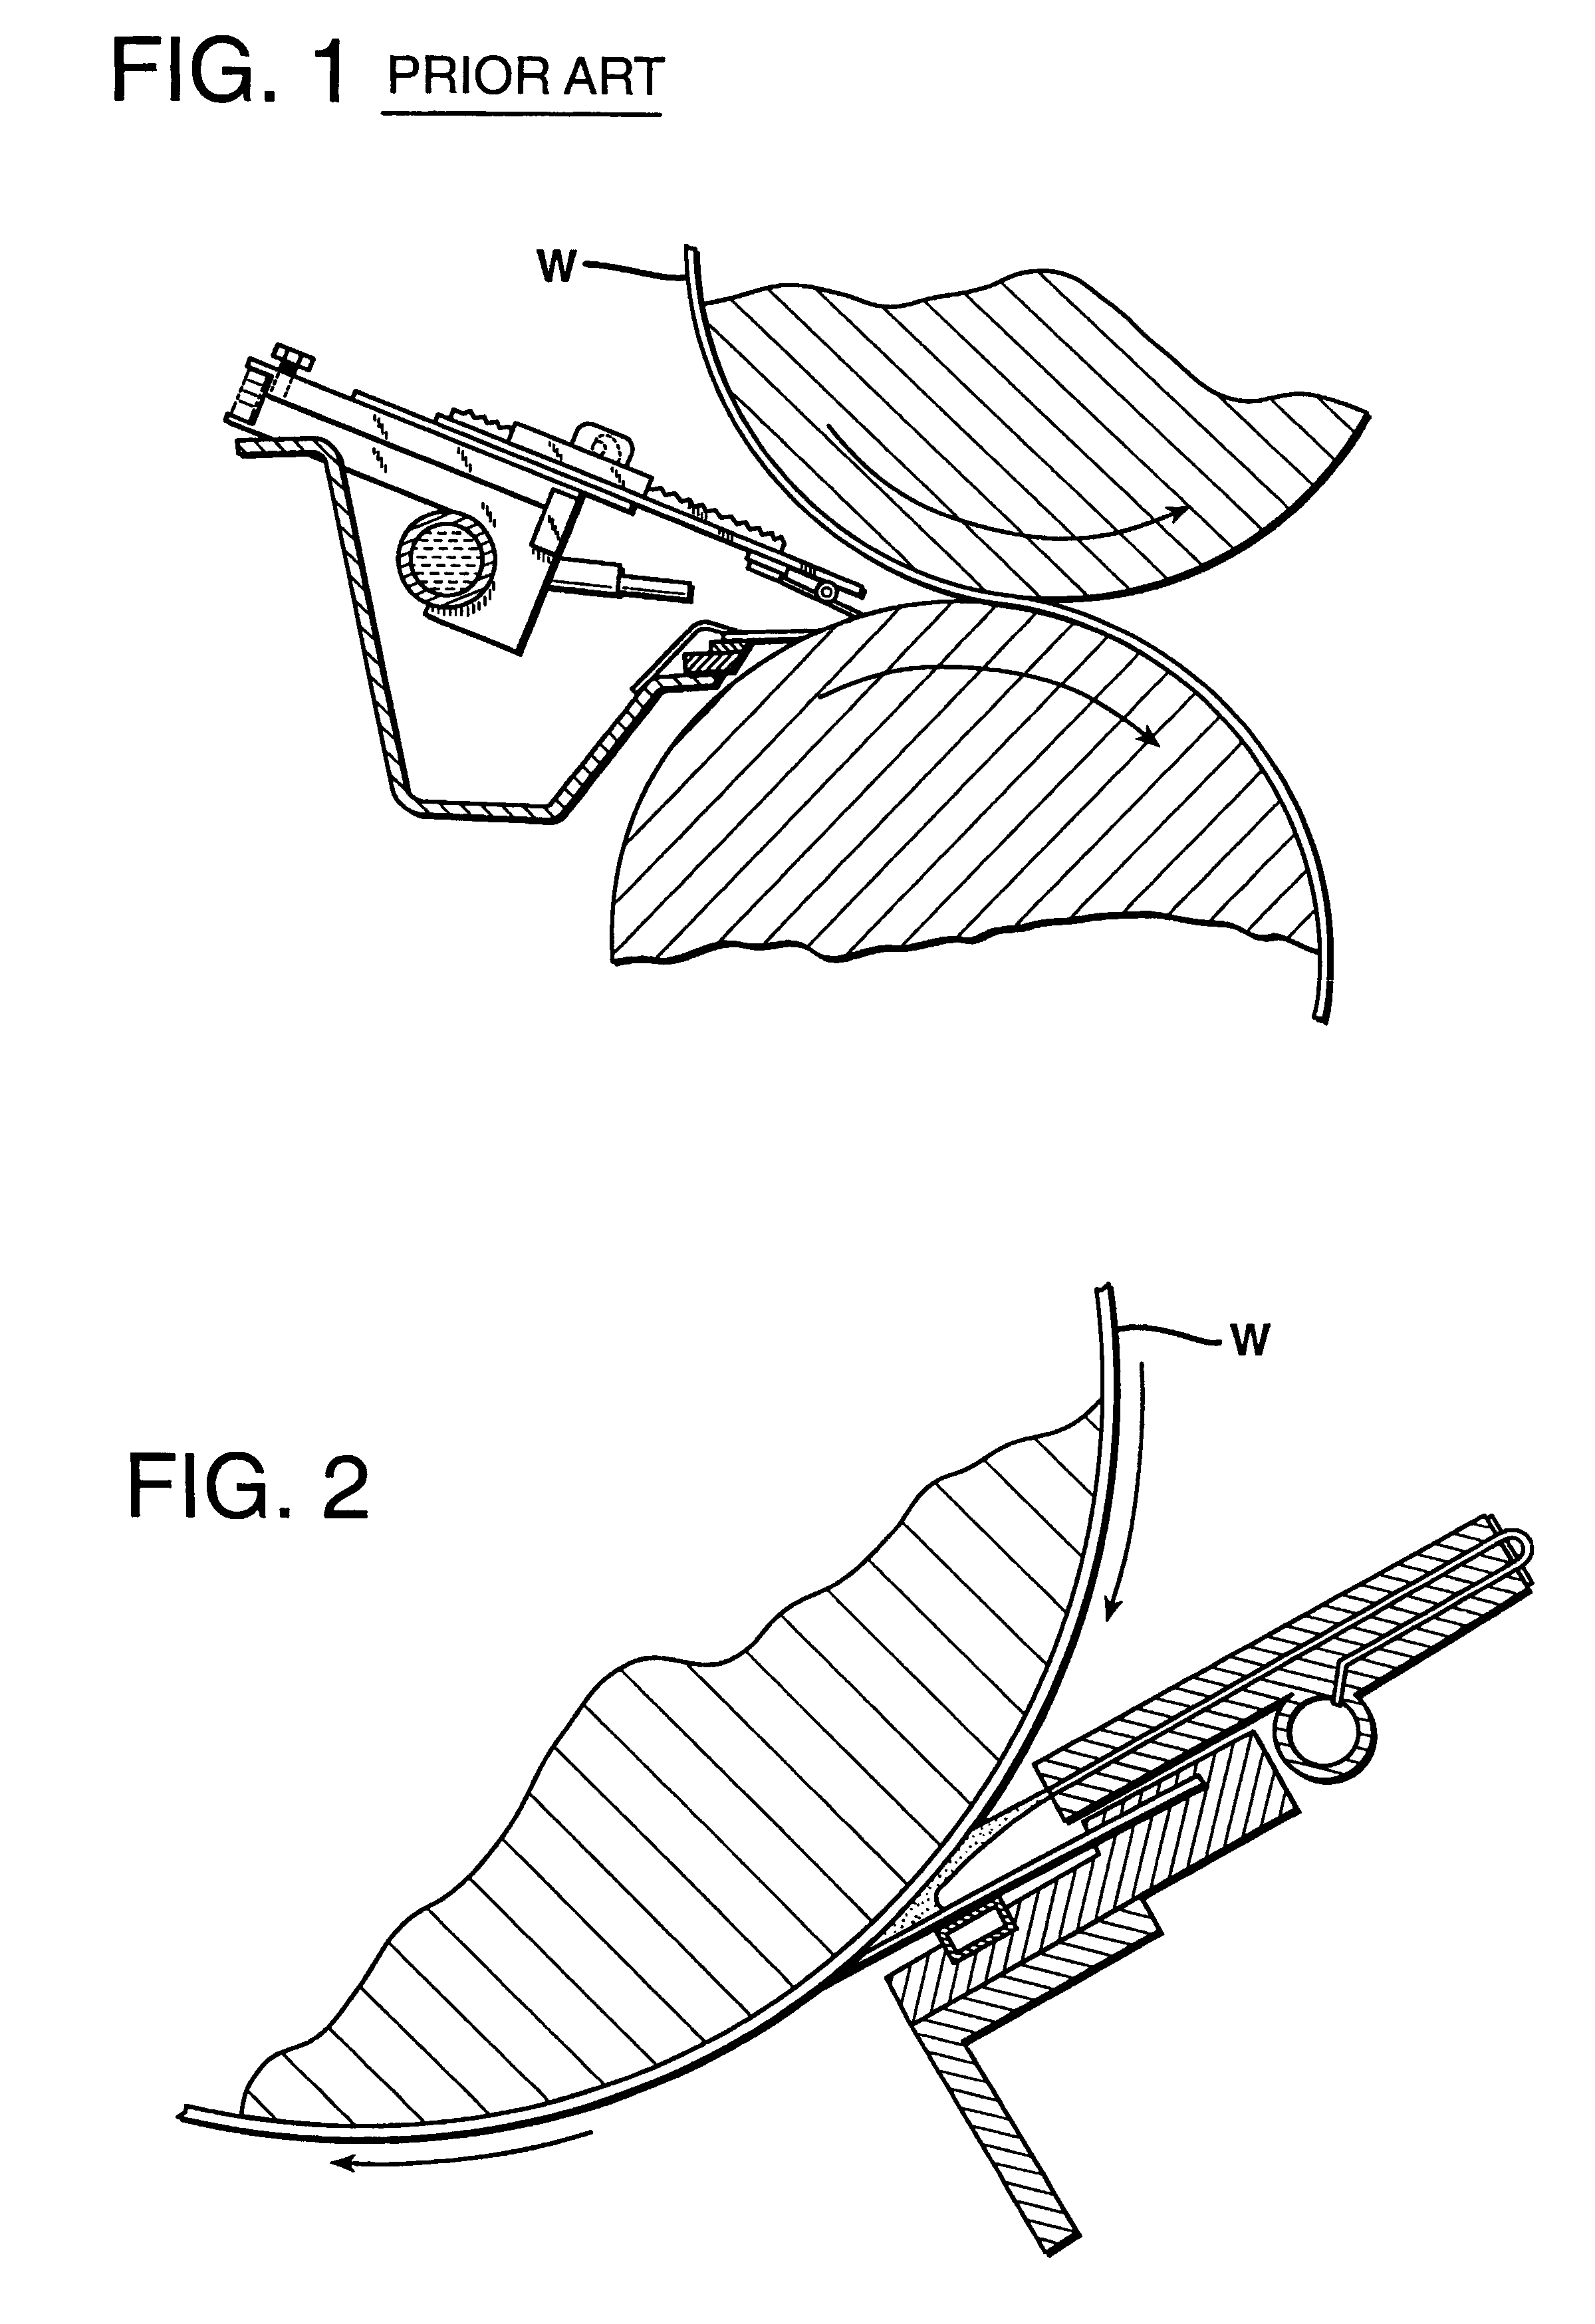 Moisture application system for a paper web